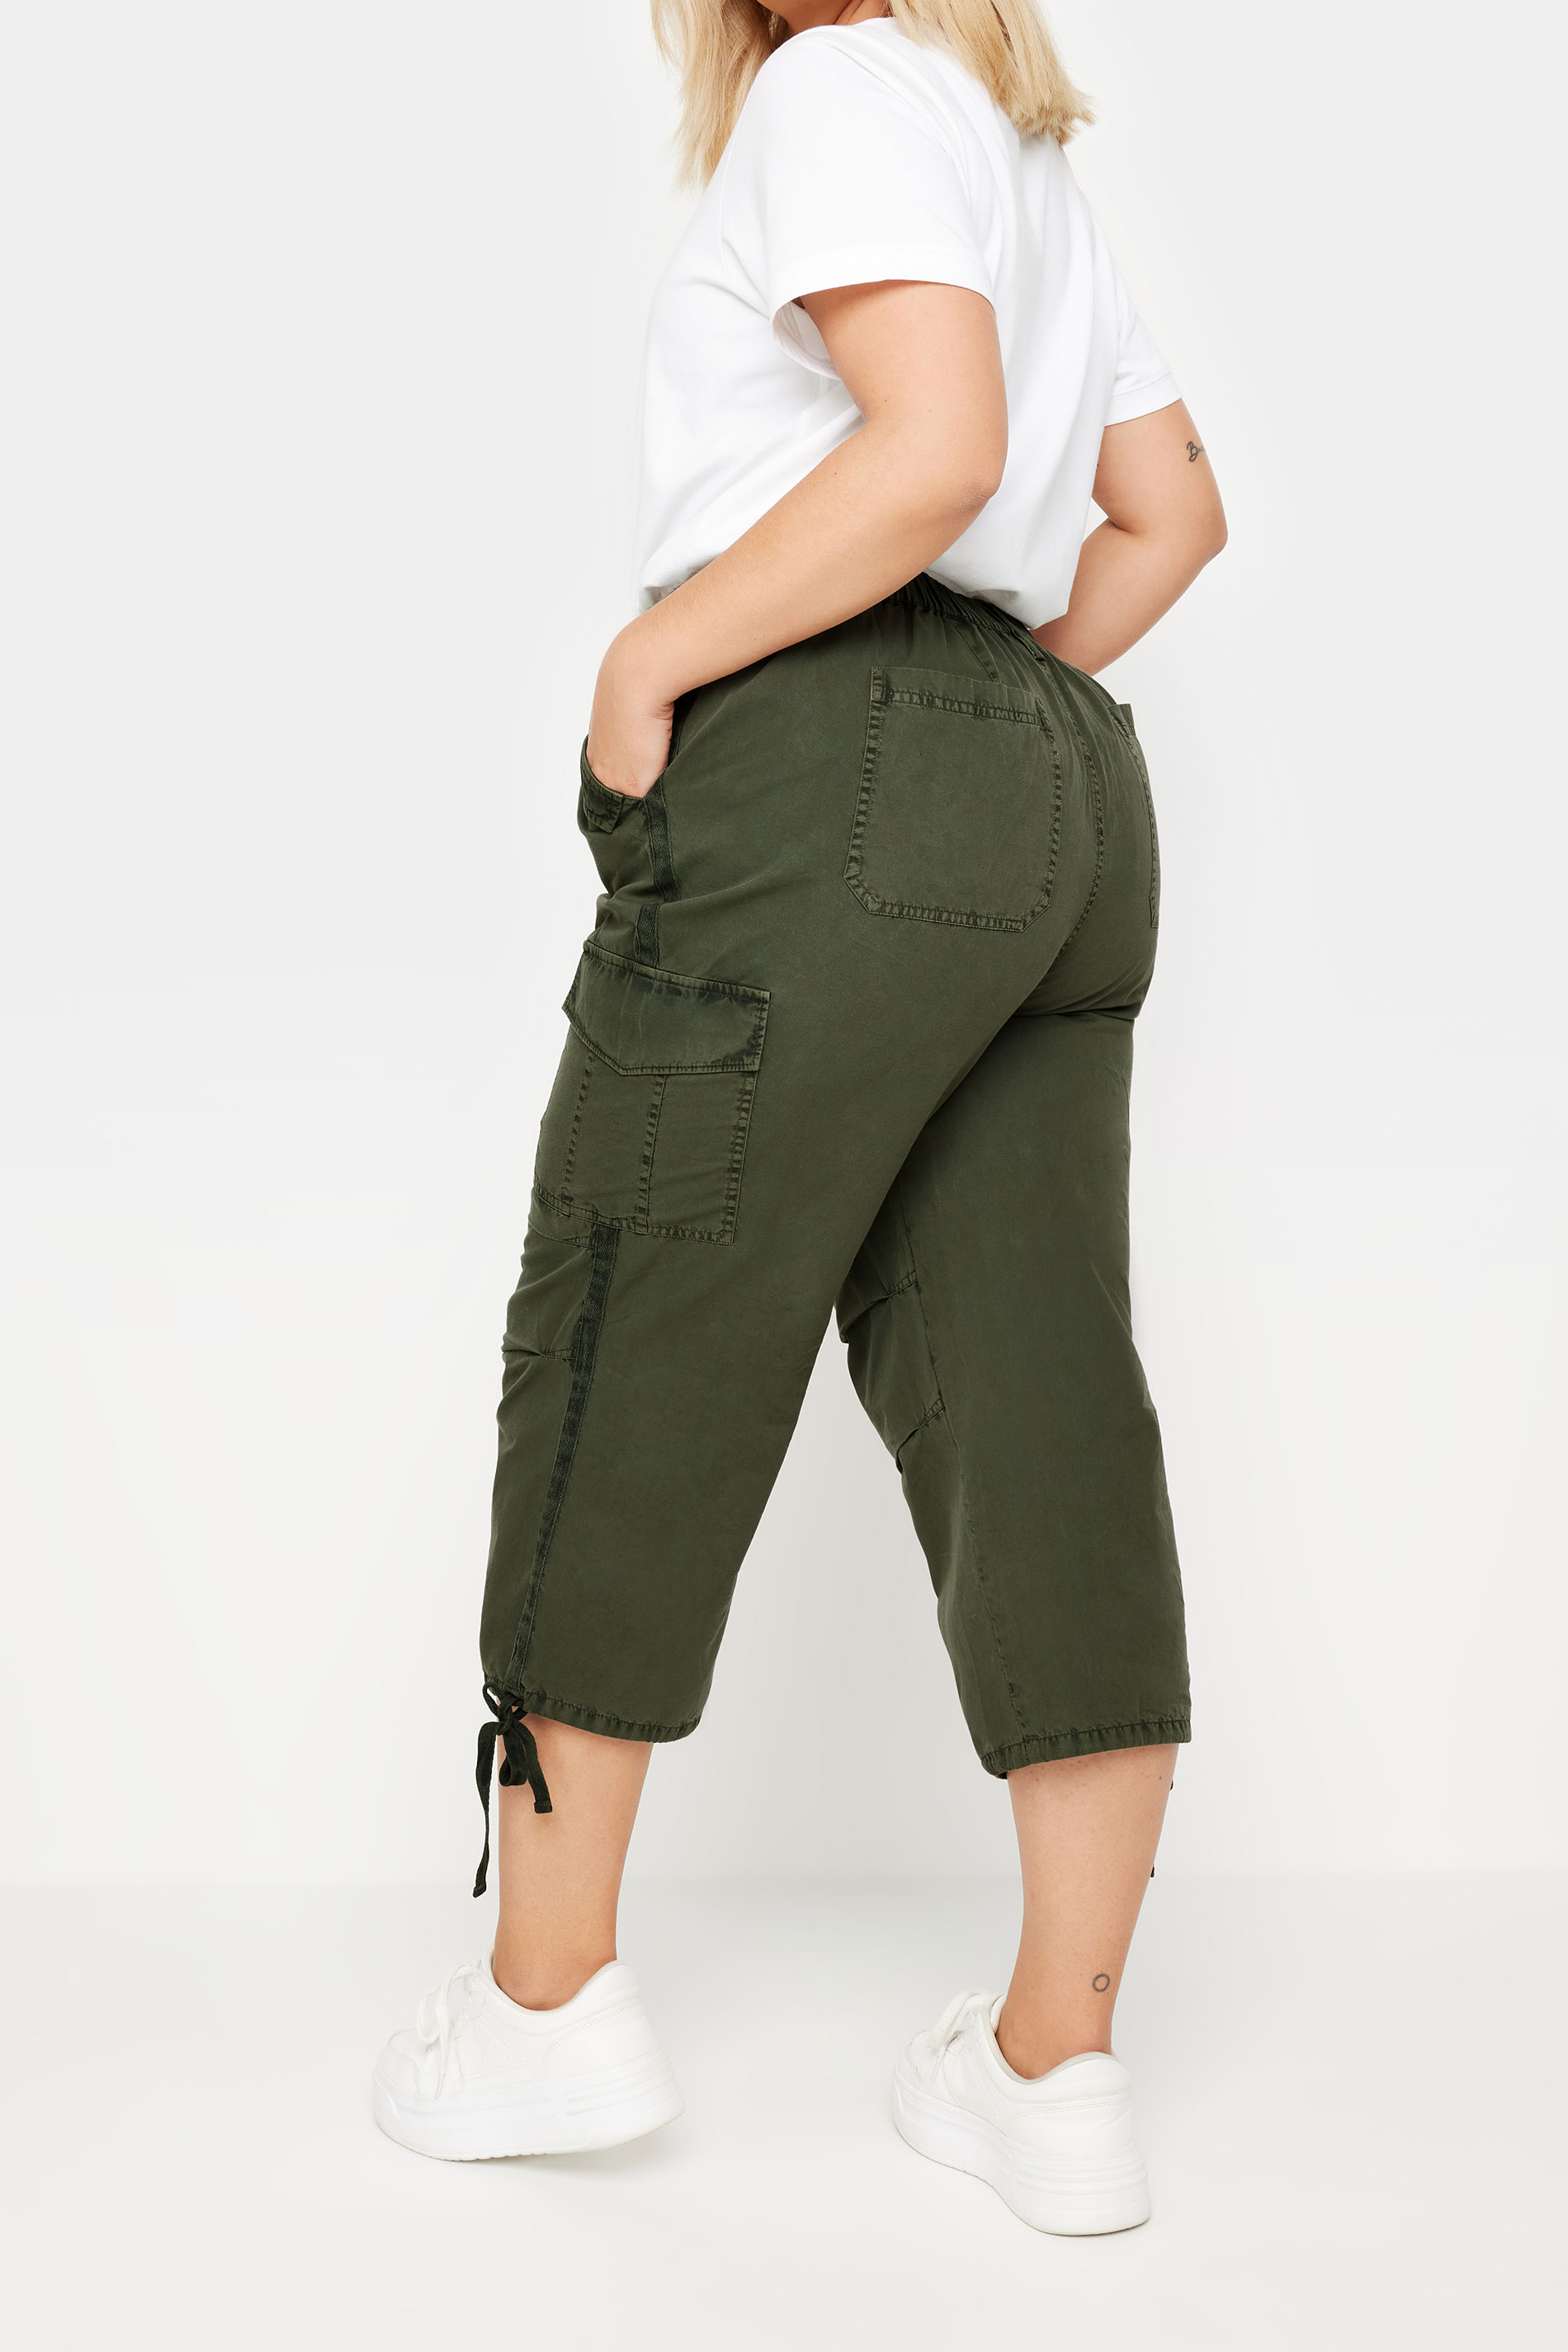 YOURS Plus Size Black Khaki Green Cropped Trousers | Yours Clothing 3